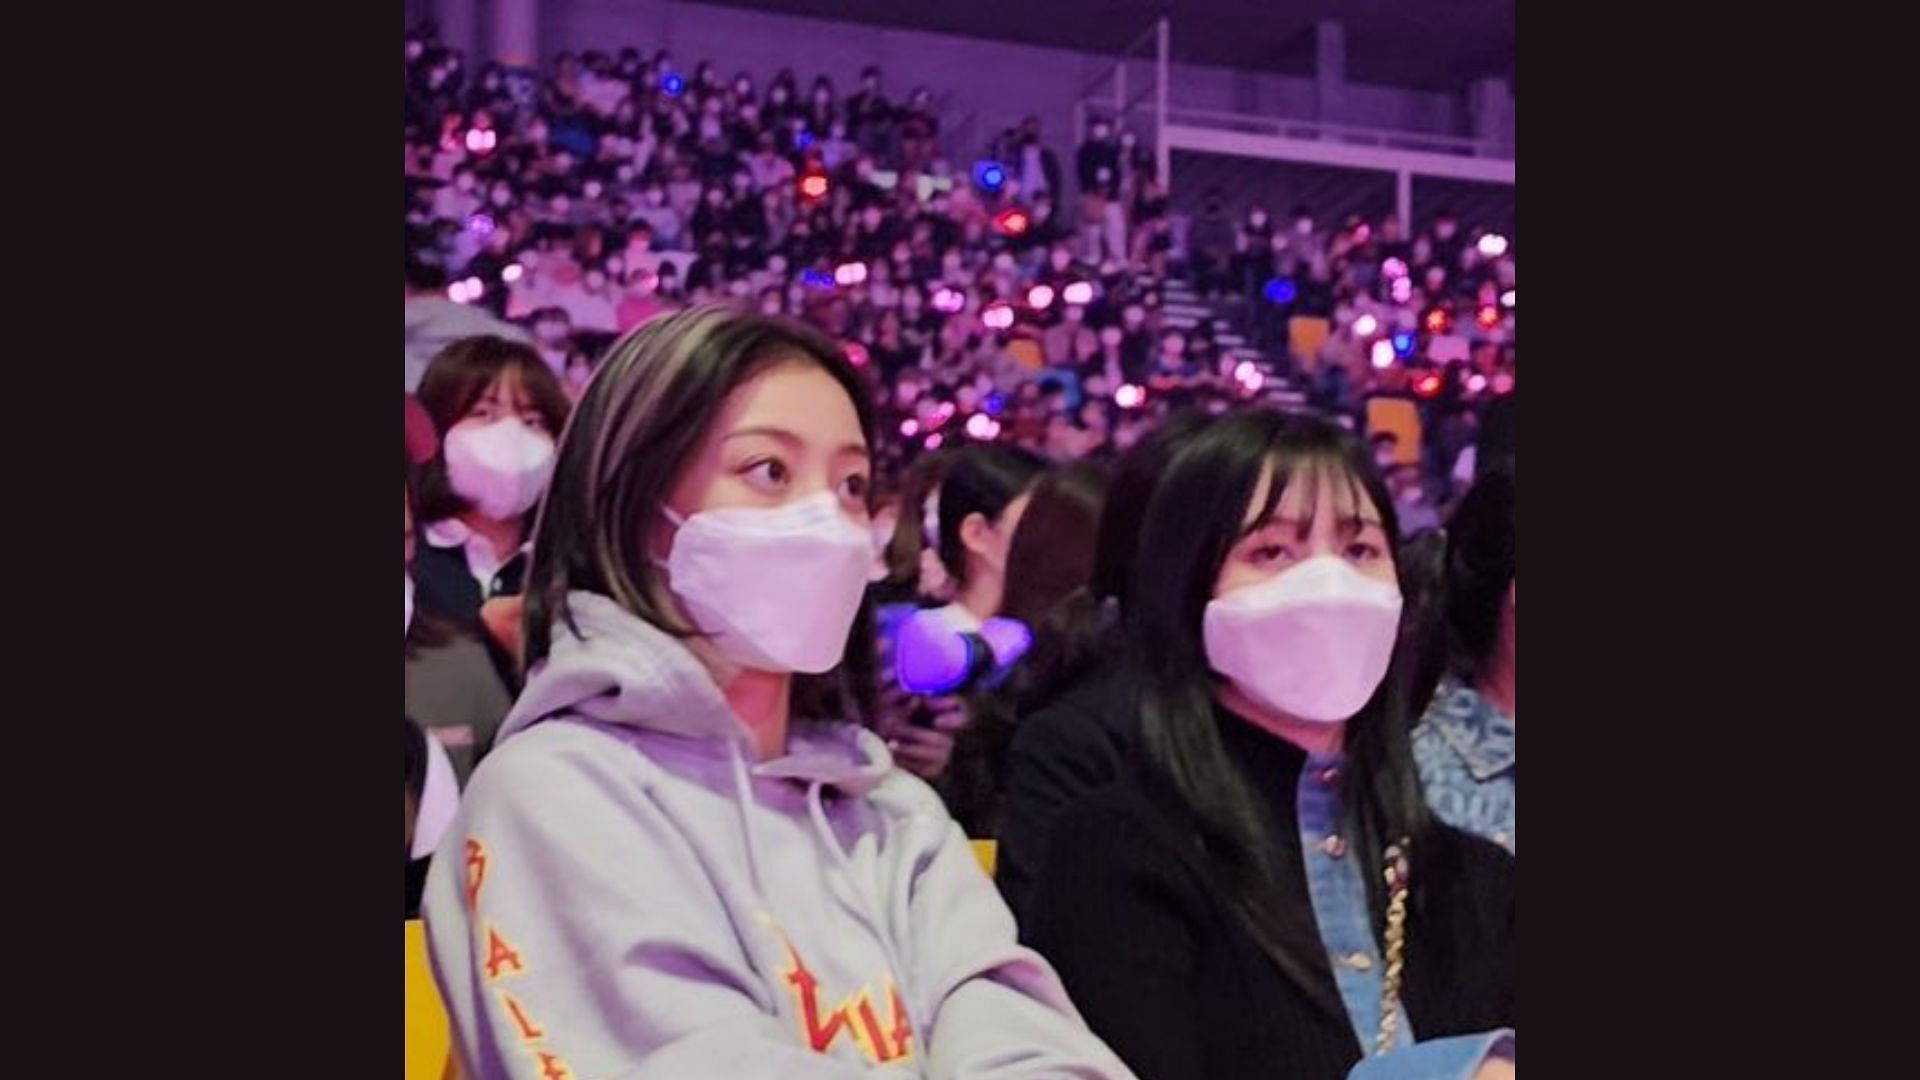 TWICE&#039;s Jihyo and Mina were also spotted supporting BLACKPINK at their Born Pink concert (Image via Twitter/BLACKPINK_BBU)